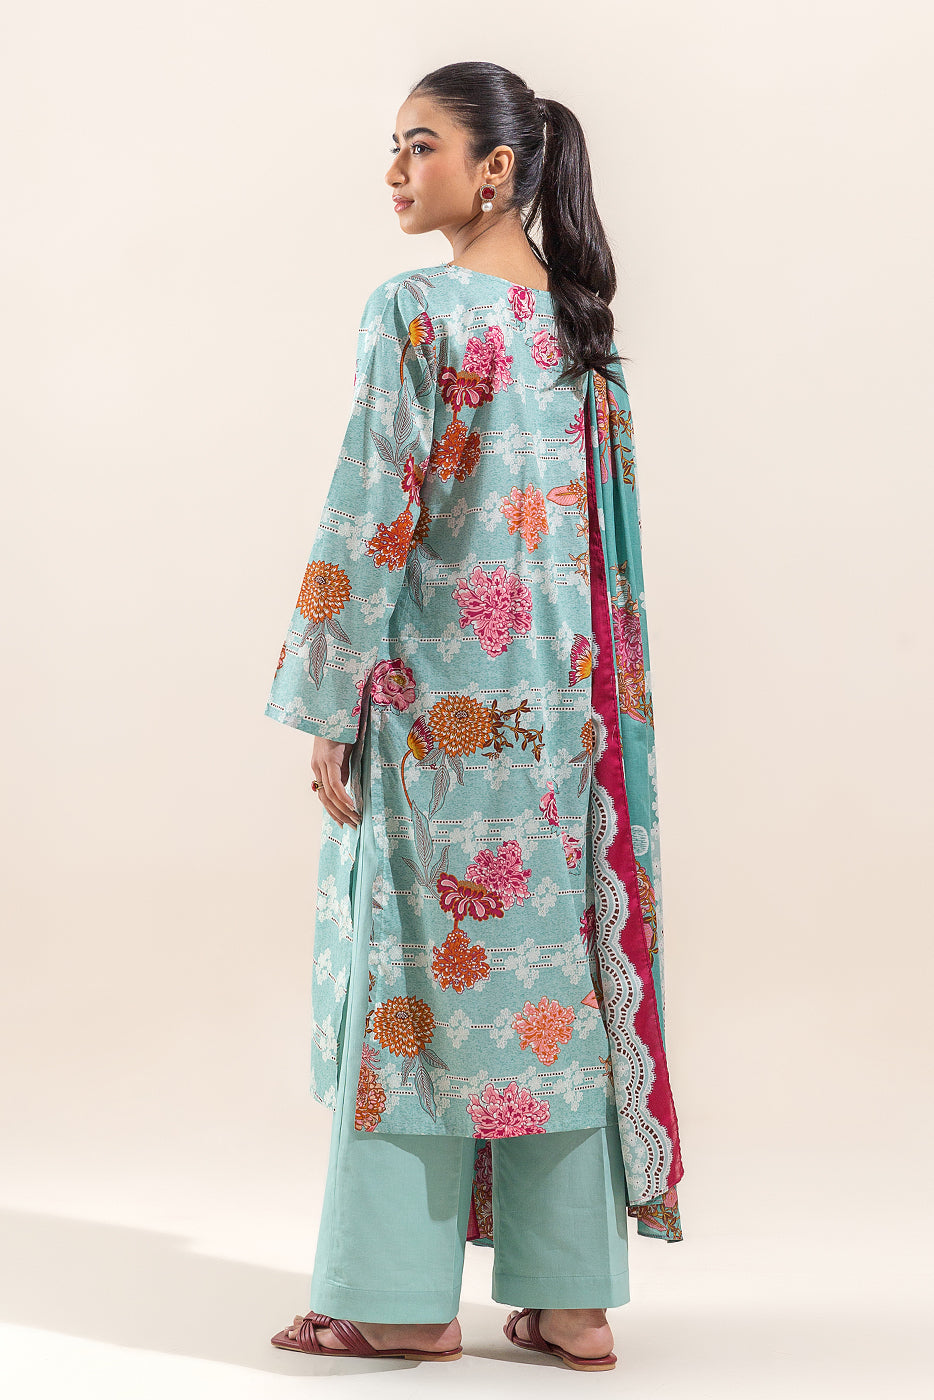 2 PIECE EMBROIDERED LAWN SUIT-DUSTY AQUA (UNSTITCHED)